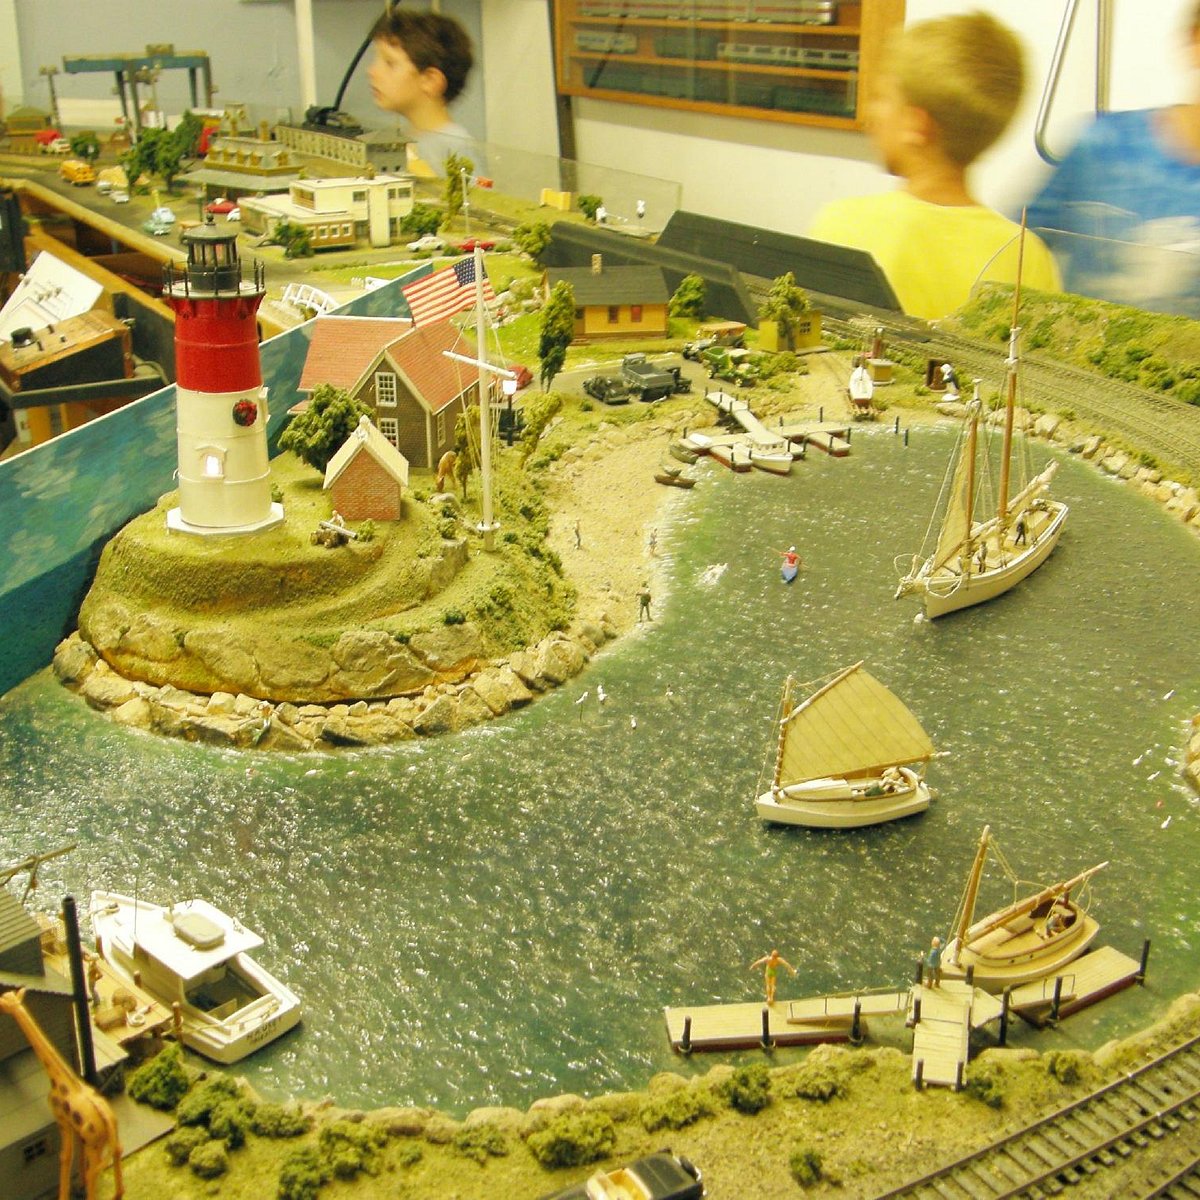 N scale fishing boat - Model Railroader Magazine - Model Railroading, Model  Trains, Reviews, Track Plans, and Forums